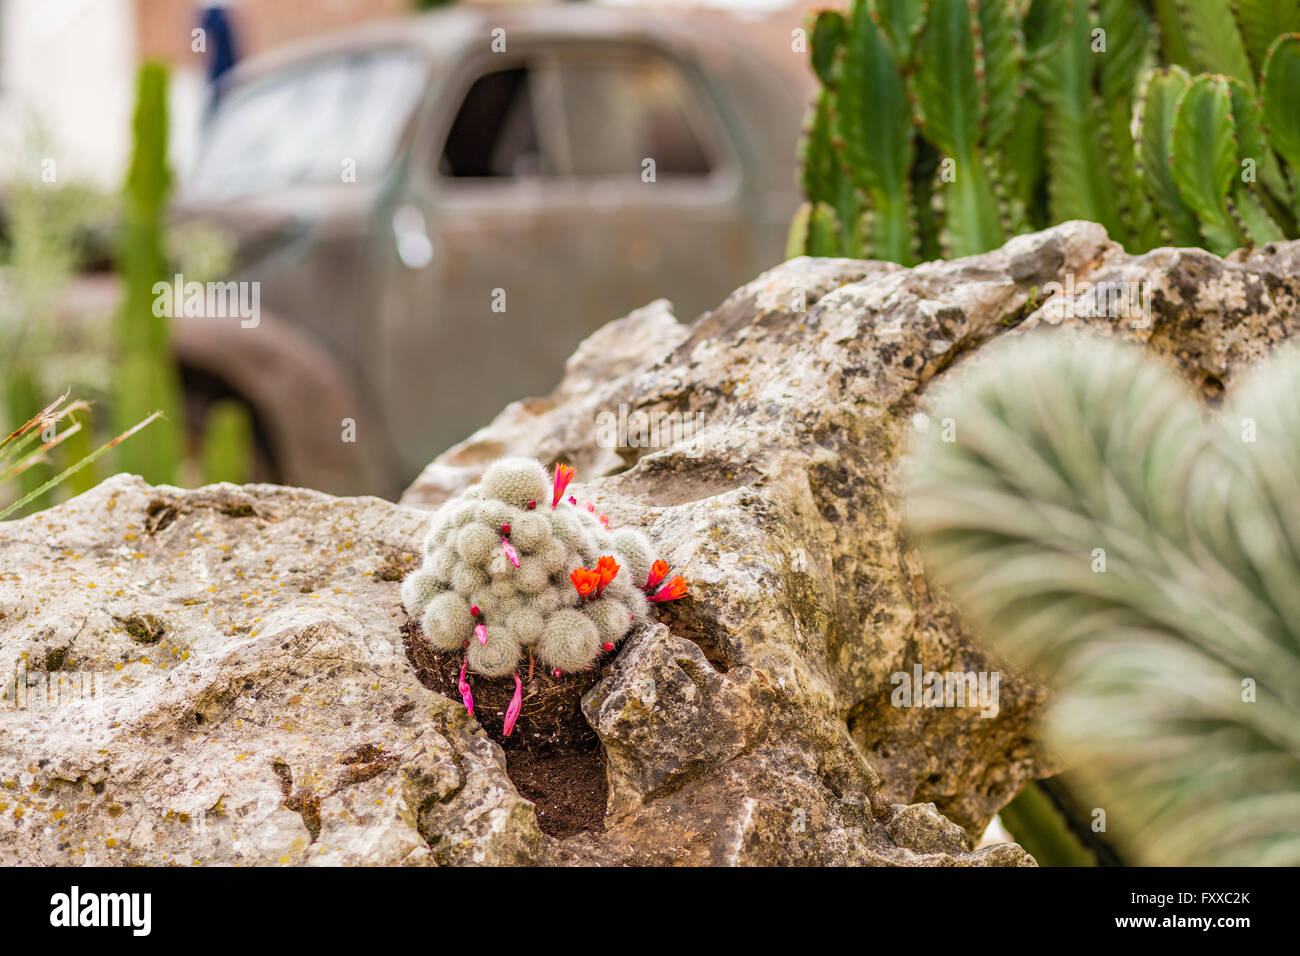 actus and succulents near the scrap of Italian historical car in the sand Stock Photo